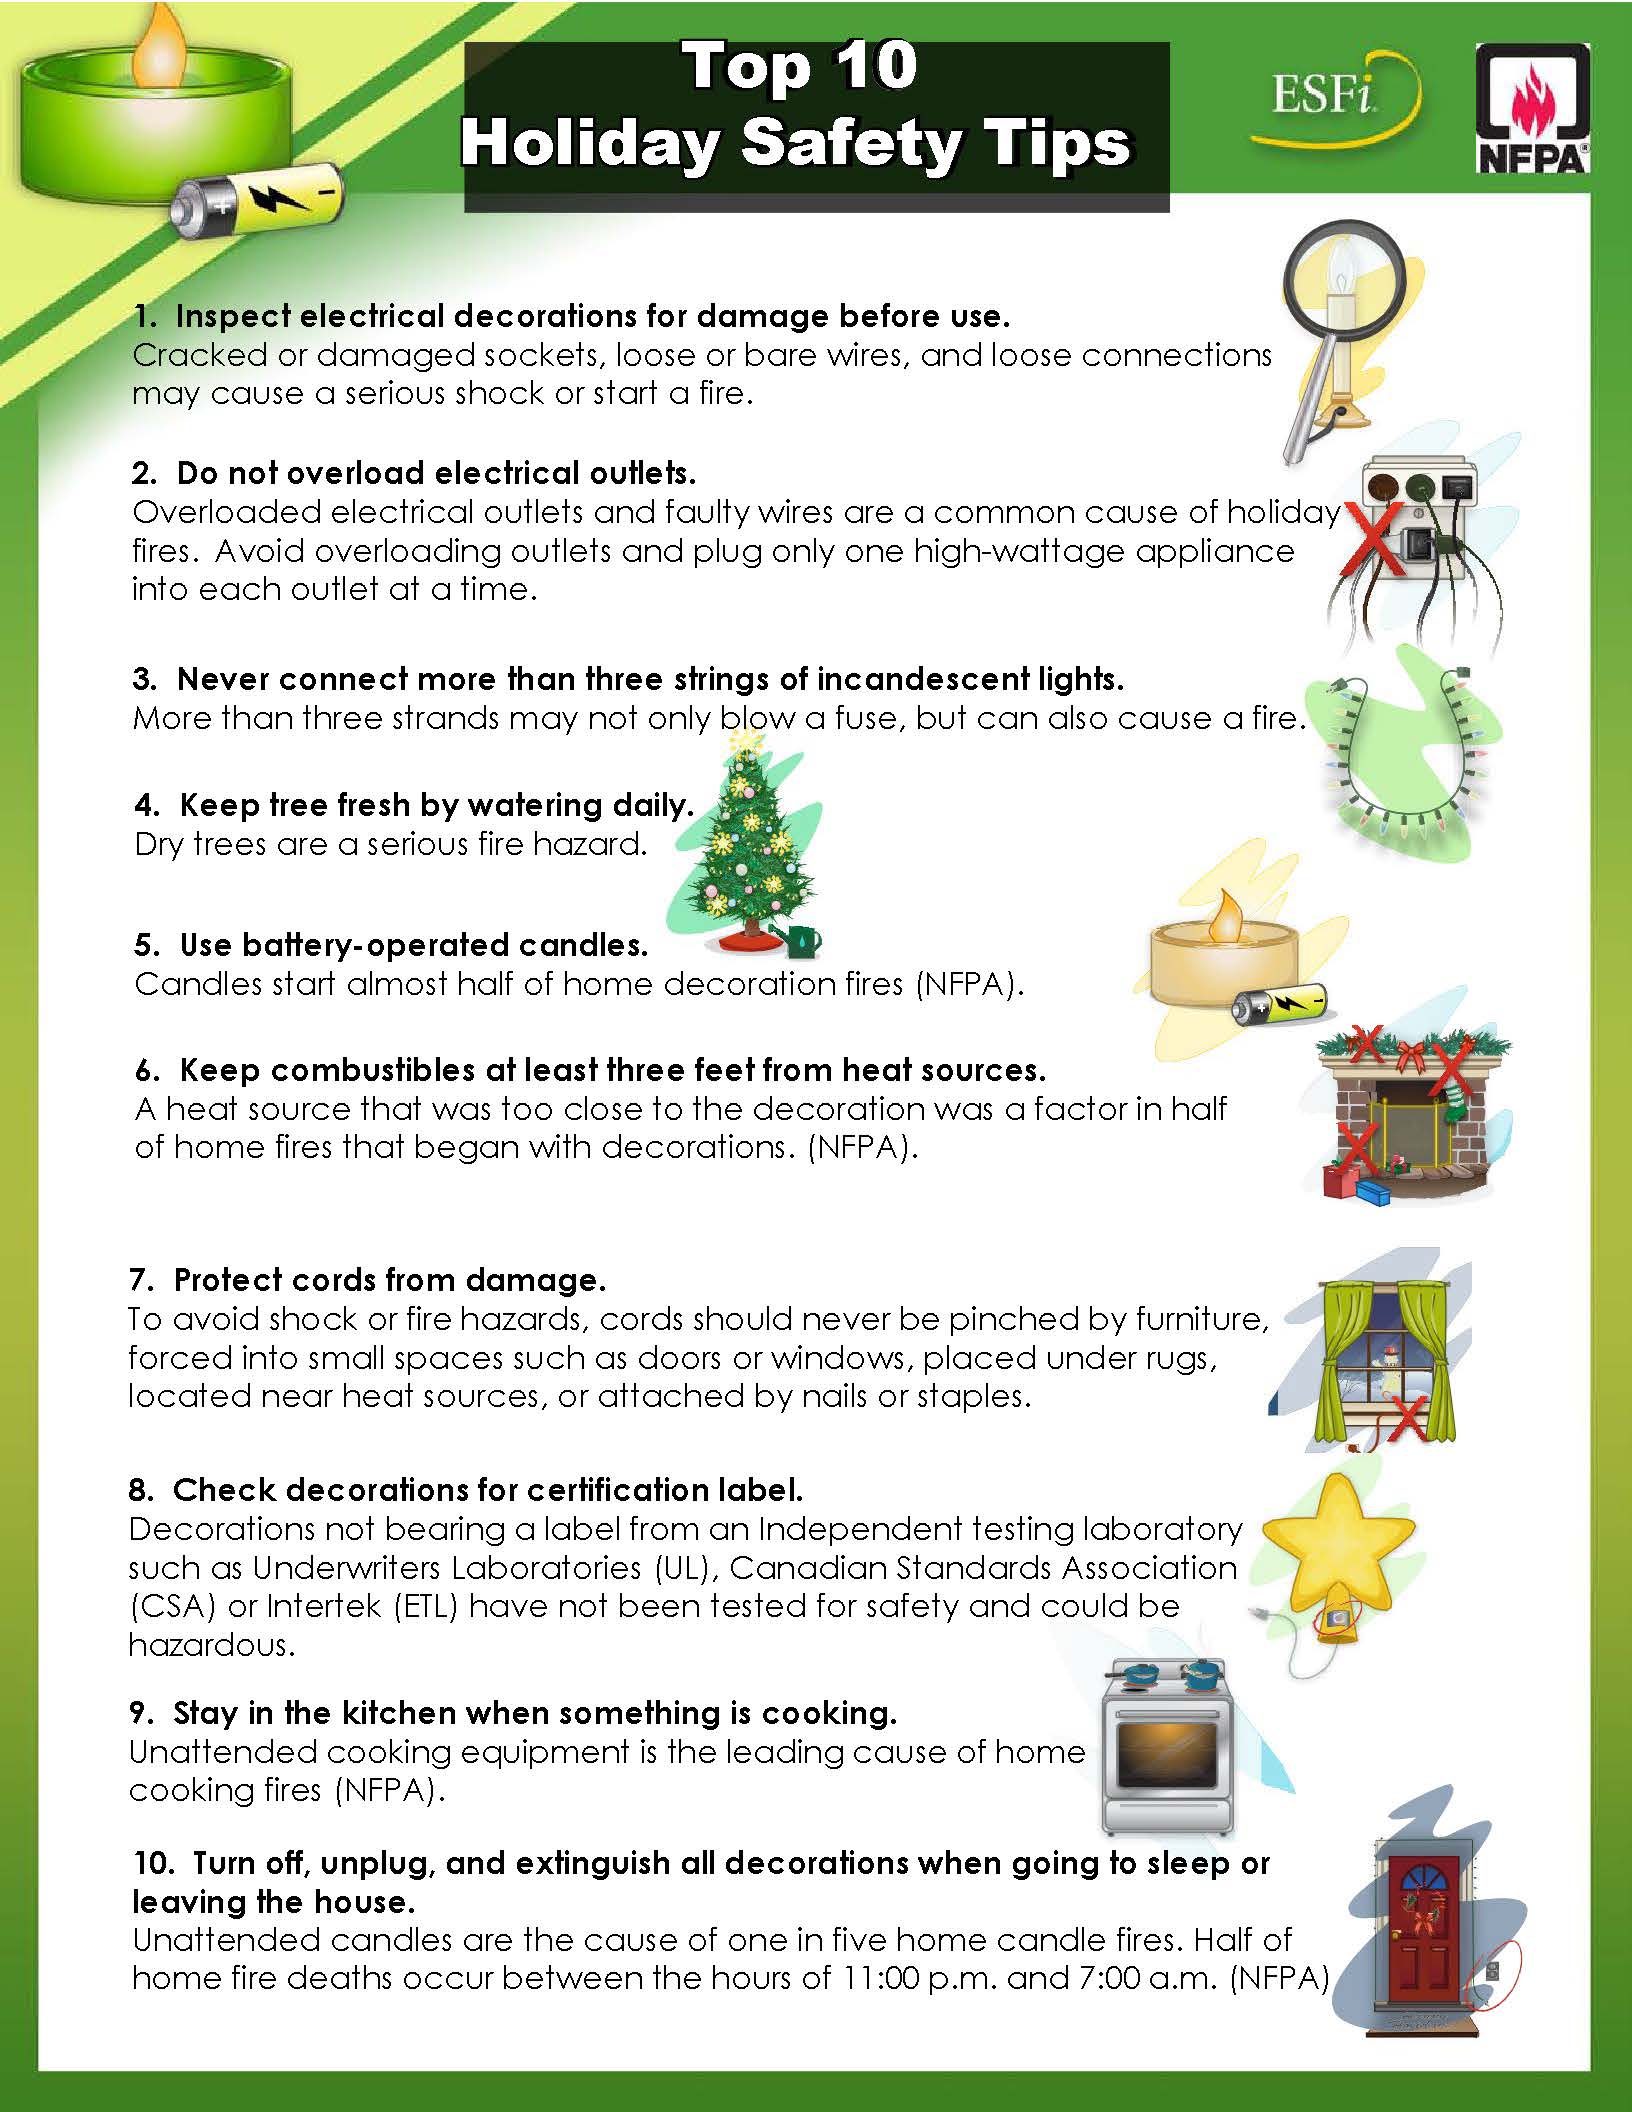 EH&S Holiday Safety Tips